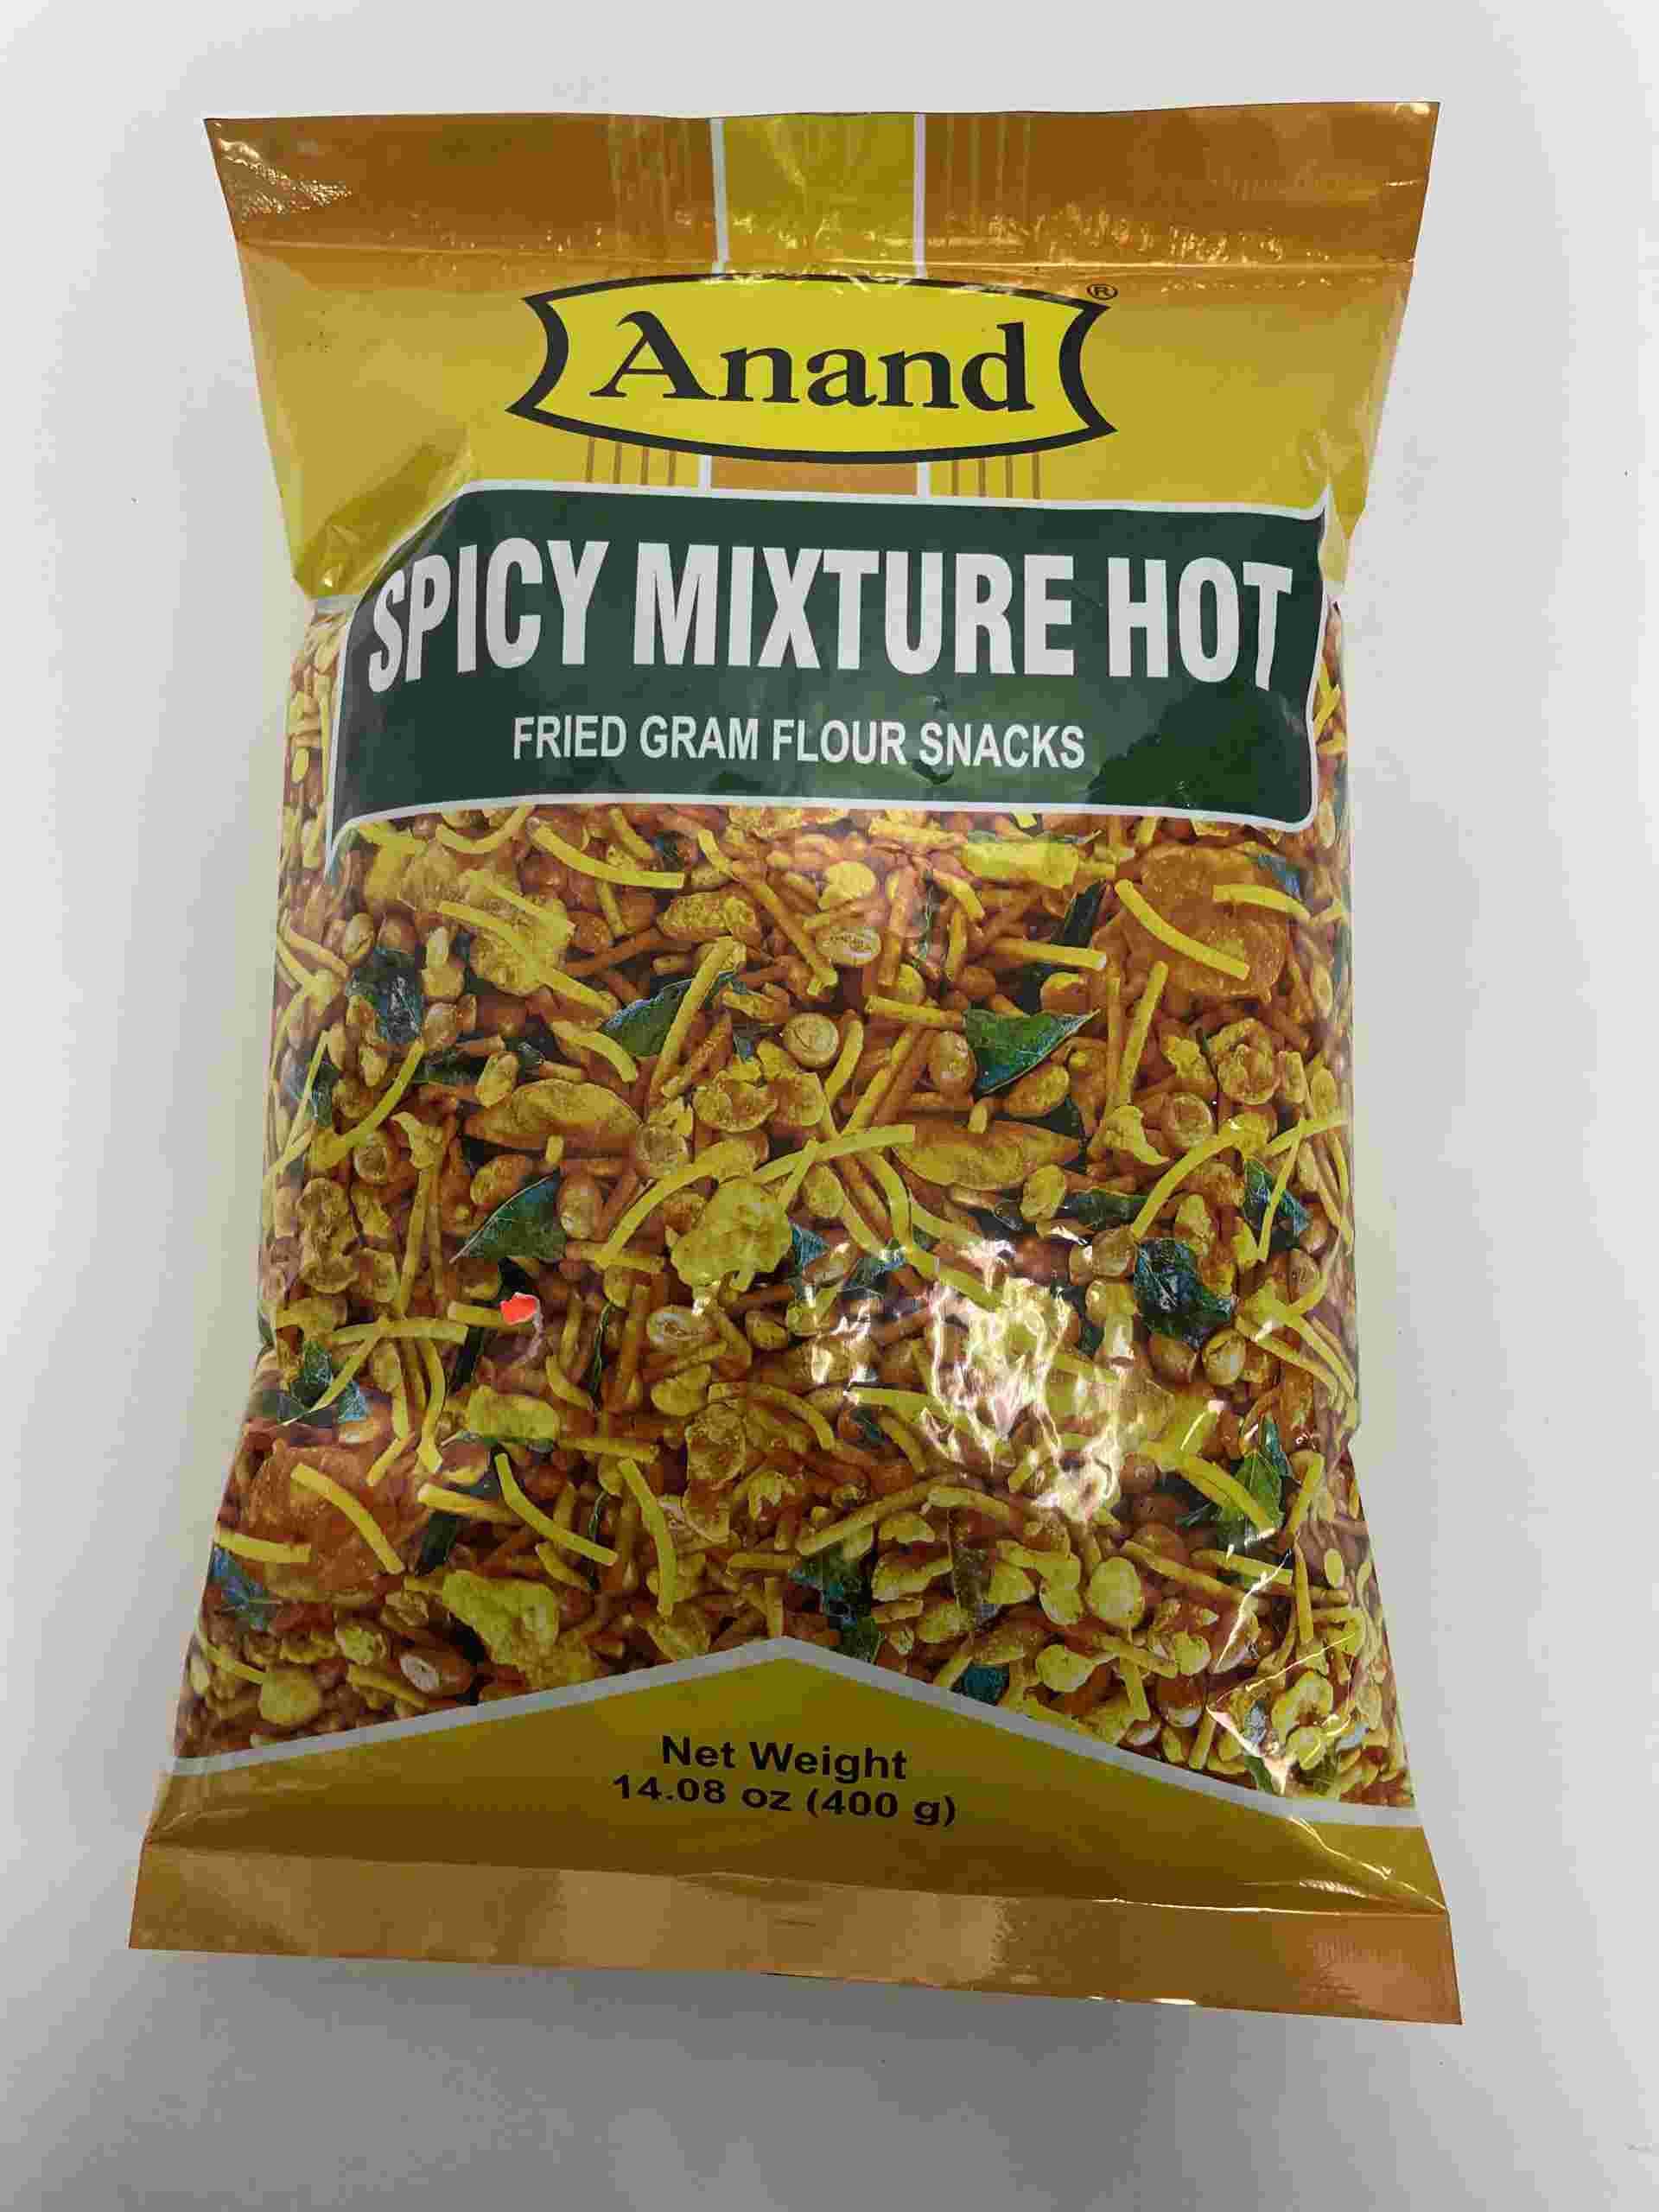 Anand Spicy Mixture Hot (Fried Gram Flour Snacks)